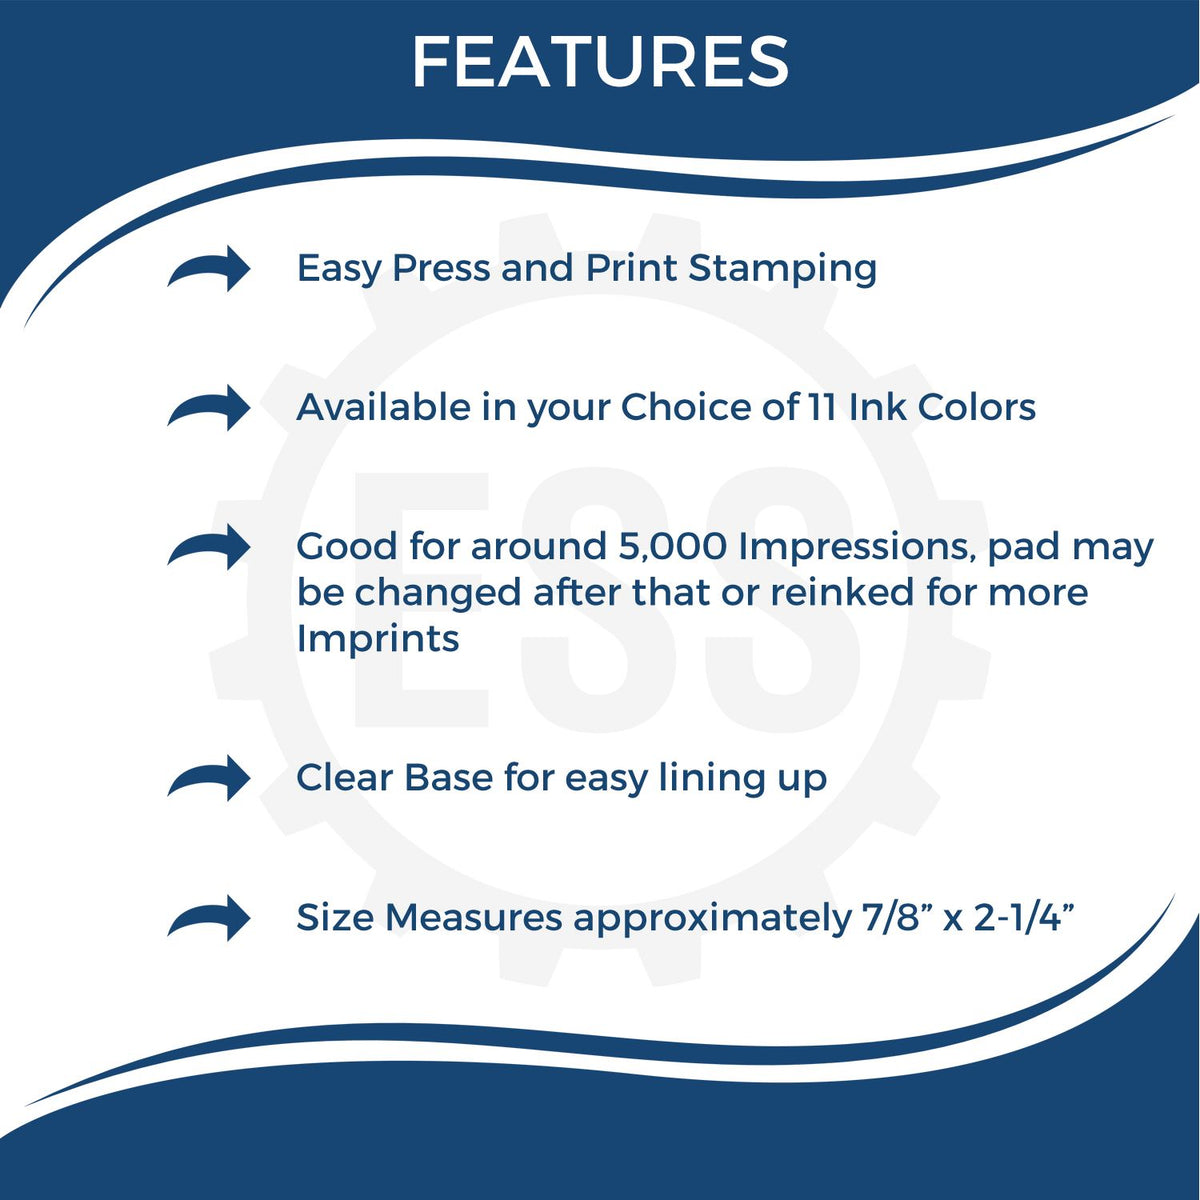 Large Self Inking Copy For Your Information Stamp